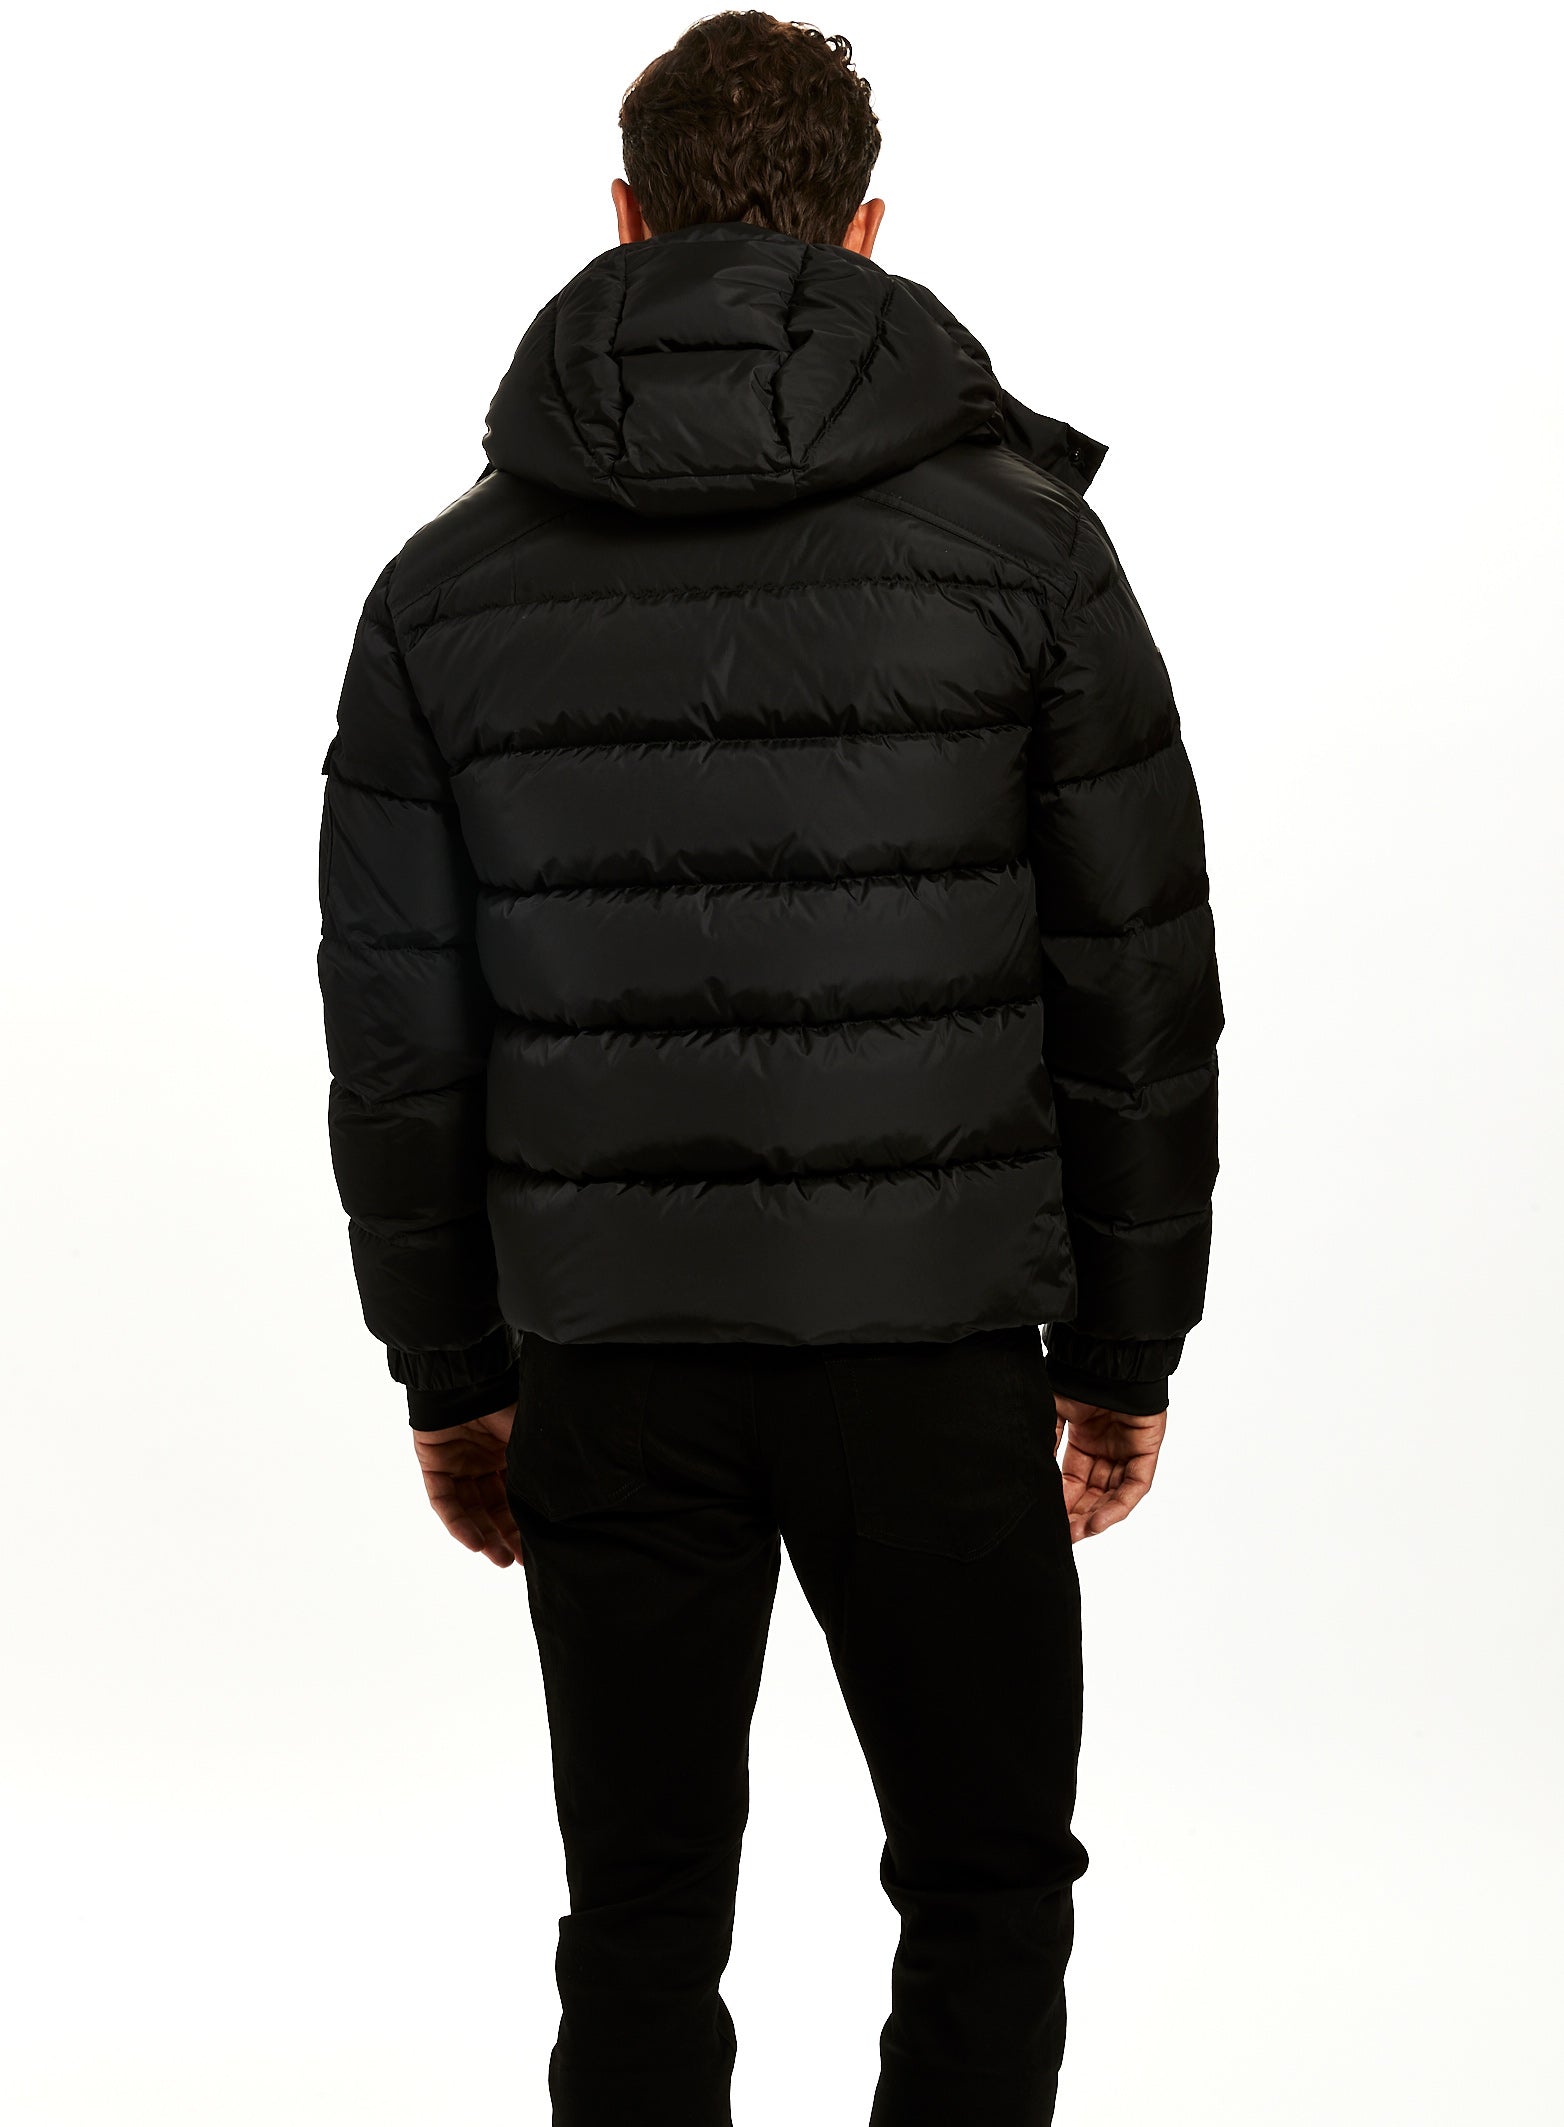 BASICS COMFORT FIT PIRATE BLACK HOODED POLY FILL JACKET